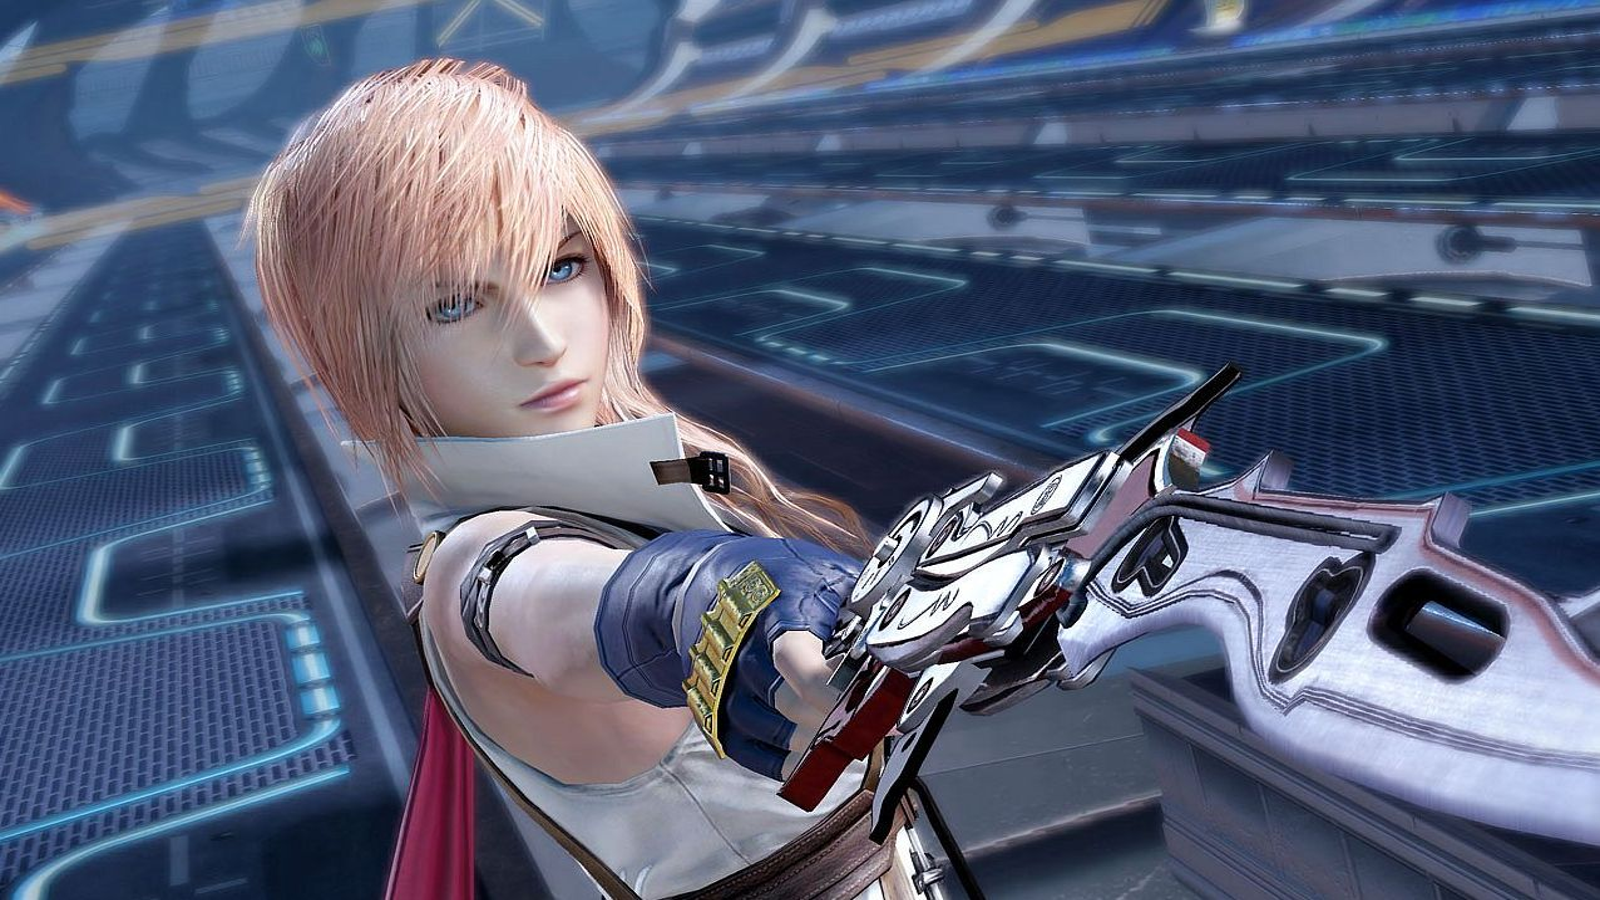 Dissidia Final Fantasy NT Free Edition out now on Steam and PS4